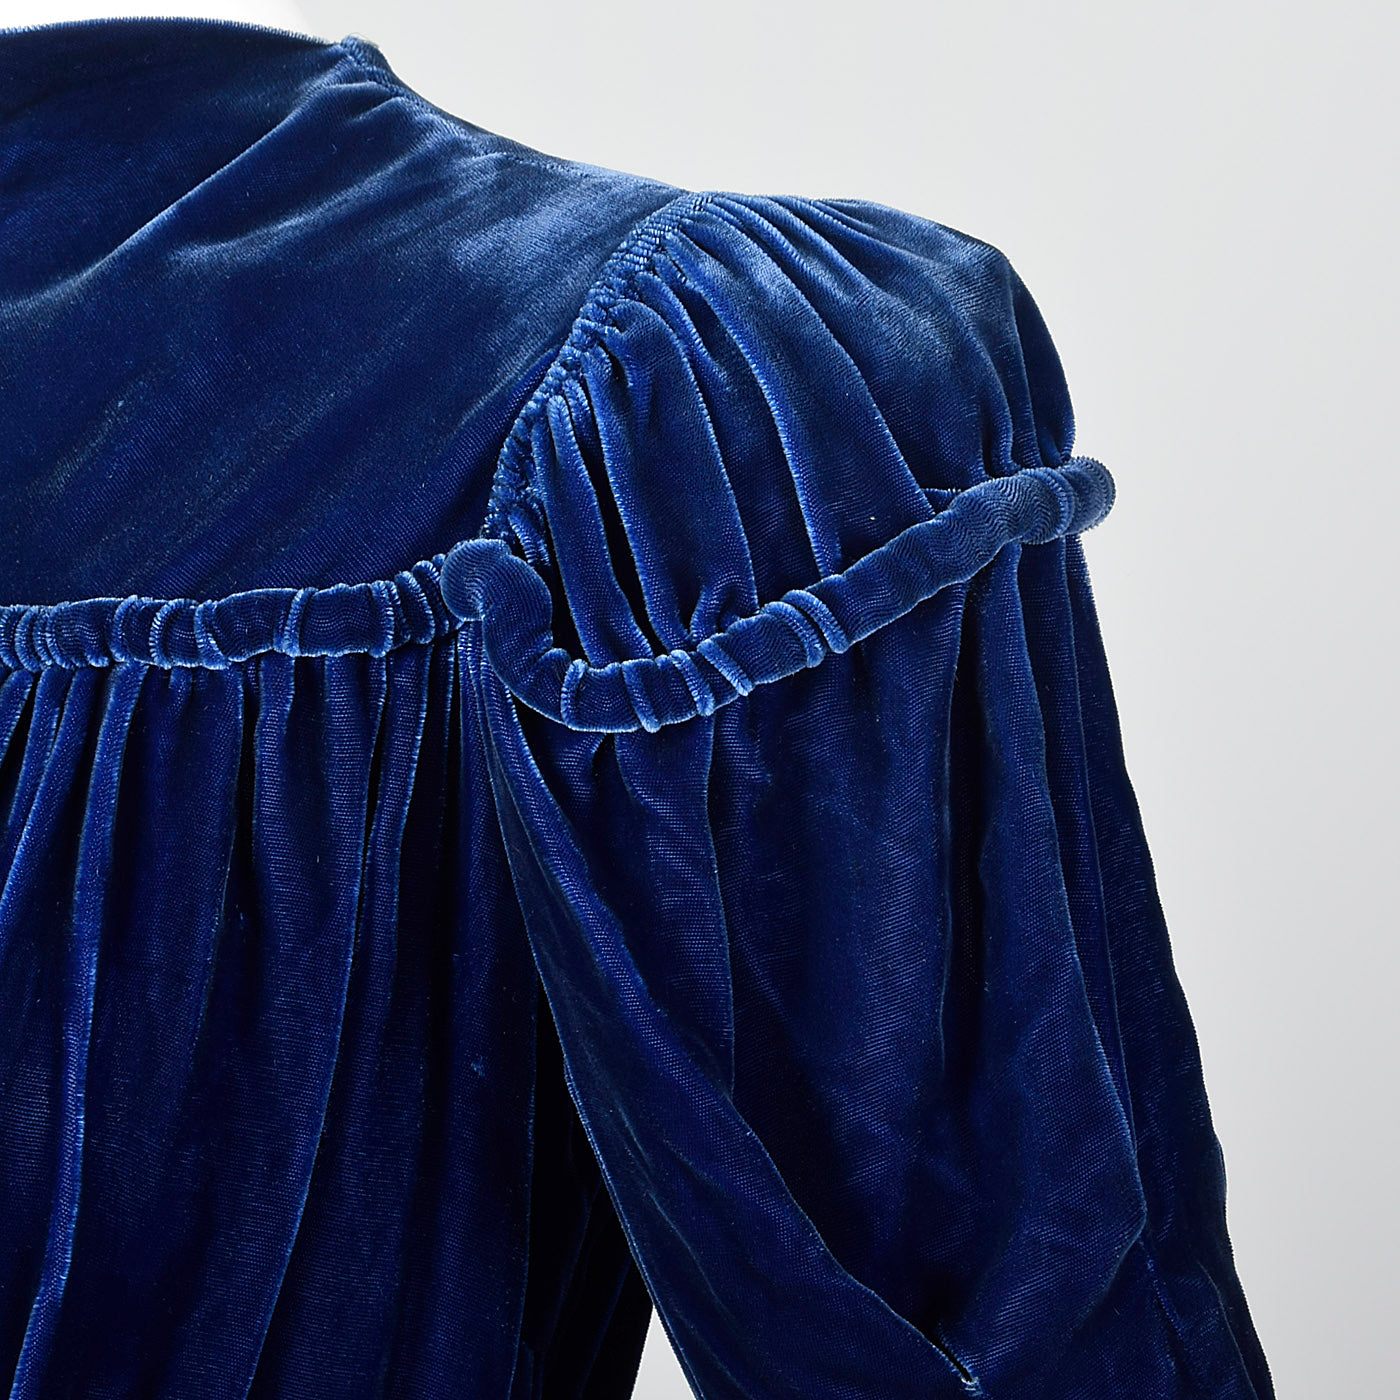 1940s Blue Silk Velvet Gown with Gathered Bust